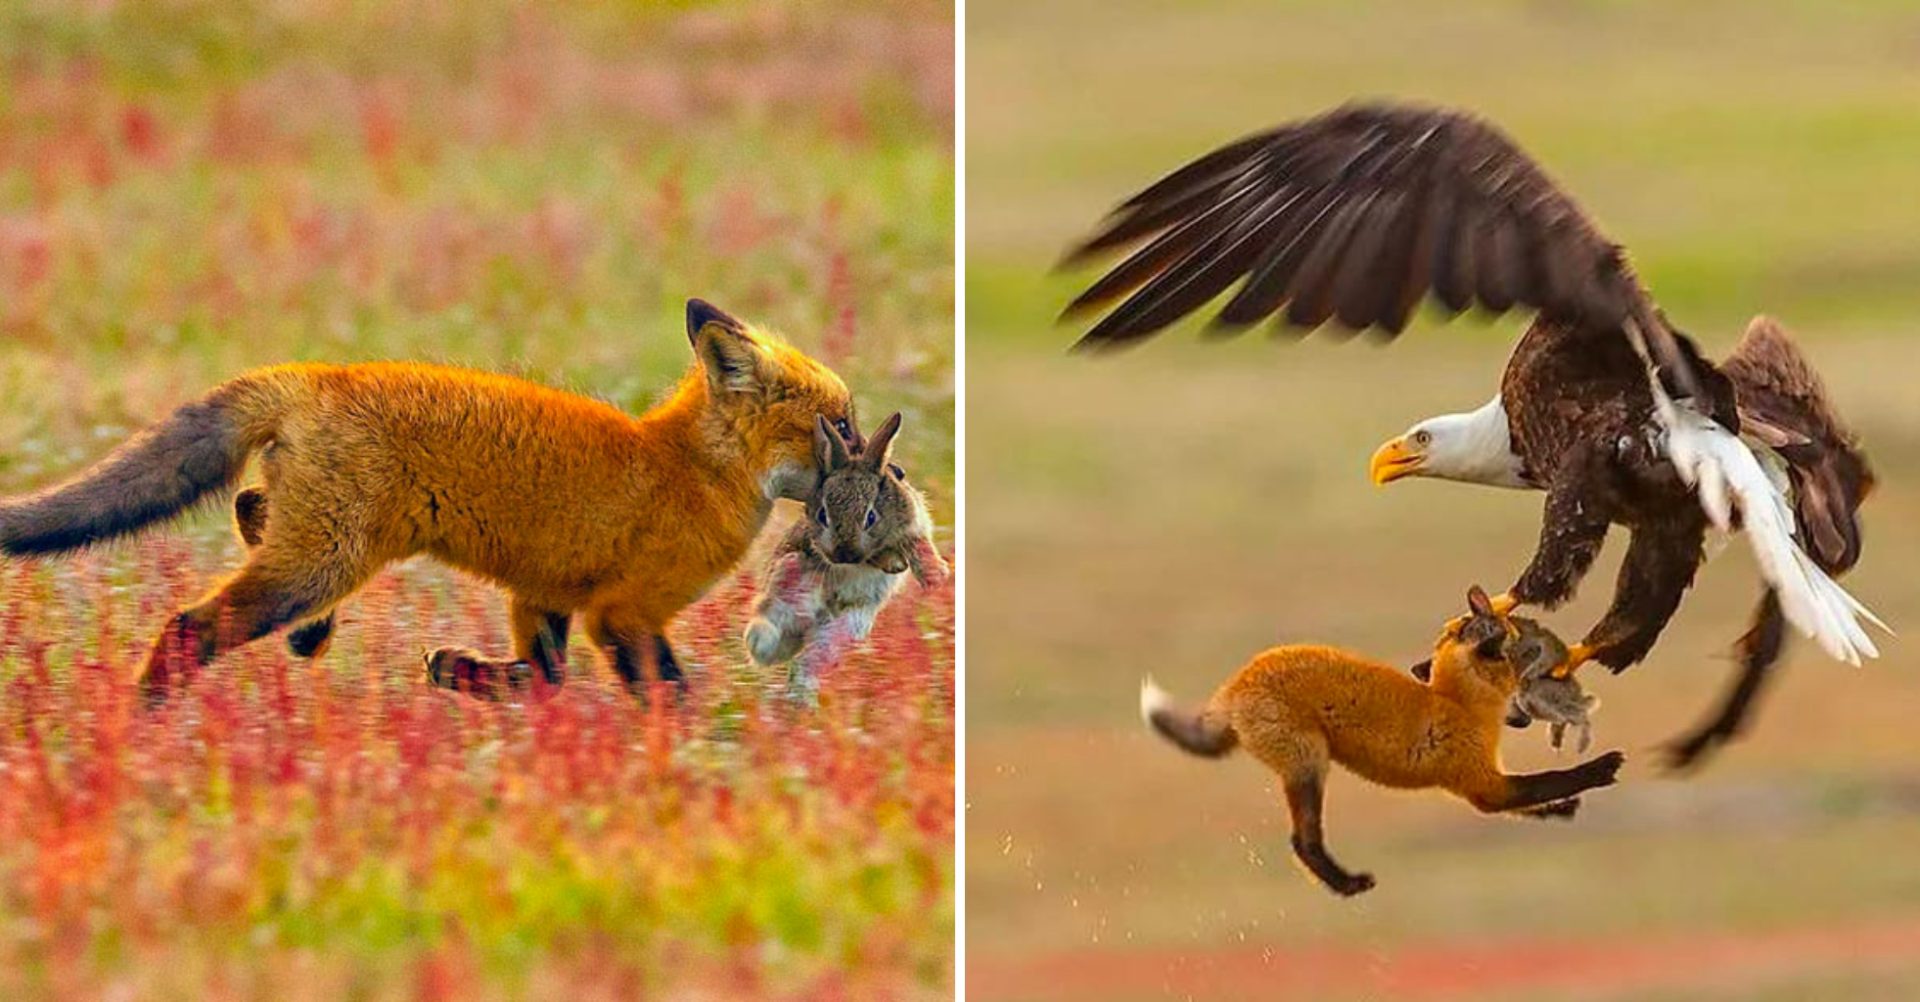 Unforgettable Wildlife Moment Captured: Eagle and Fox Fighting for a Rabbit in Epic Avian Battle